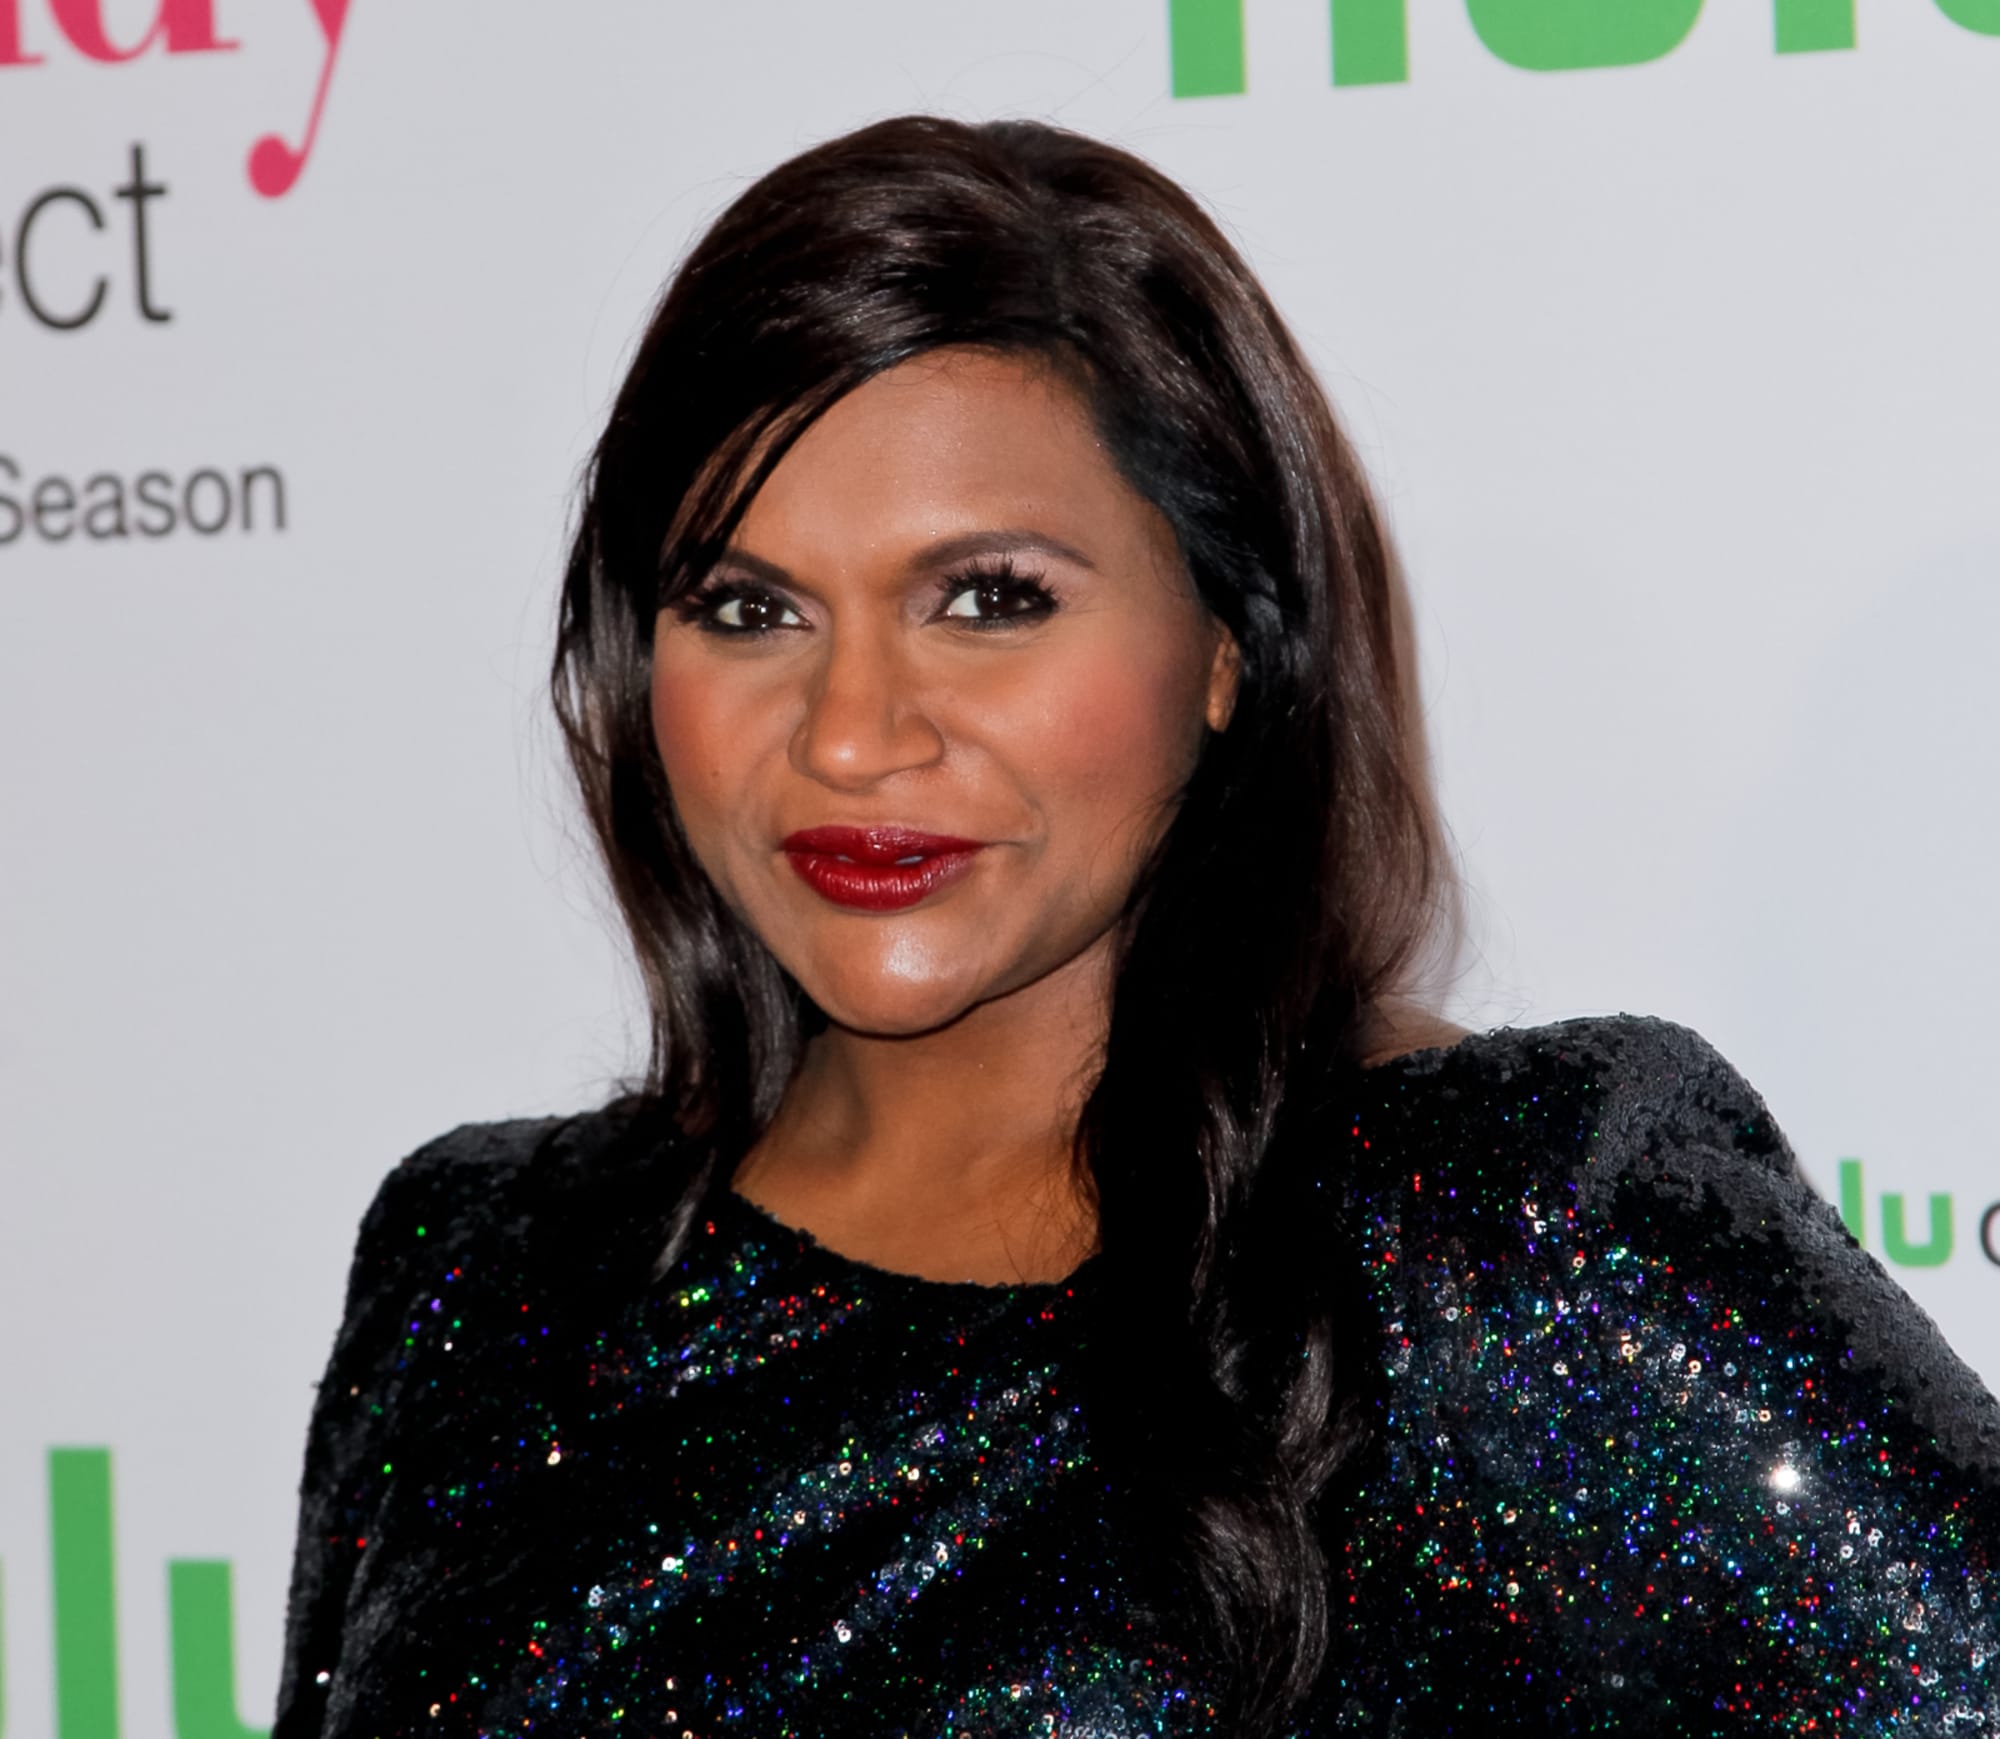 The Mindy Project is coming to Netflix in January 2023

+2023